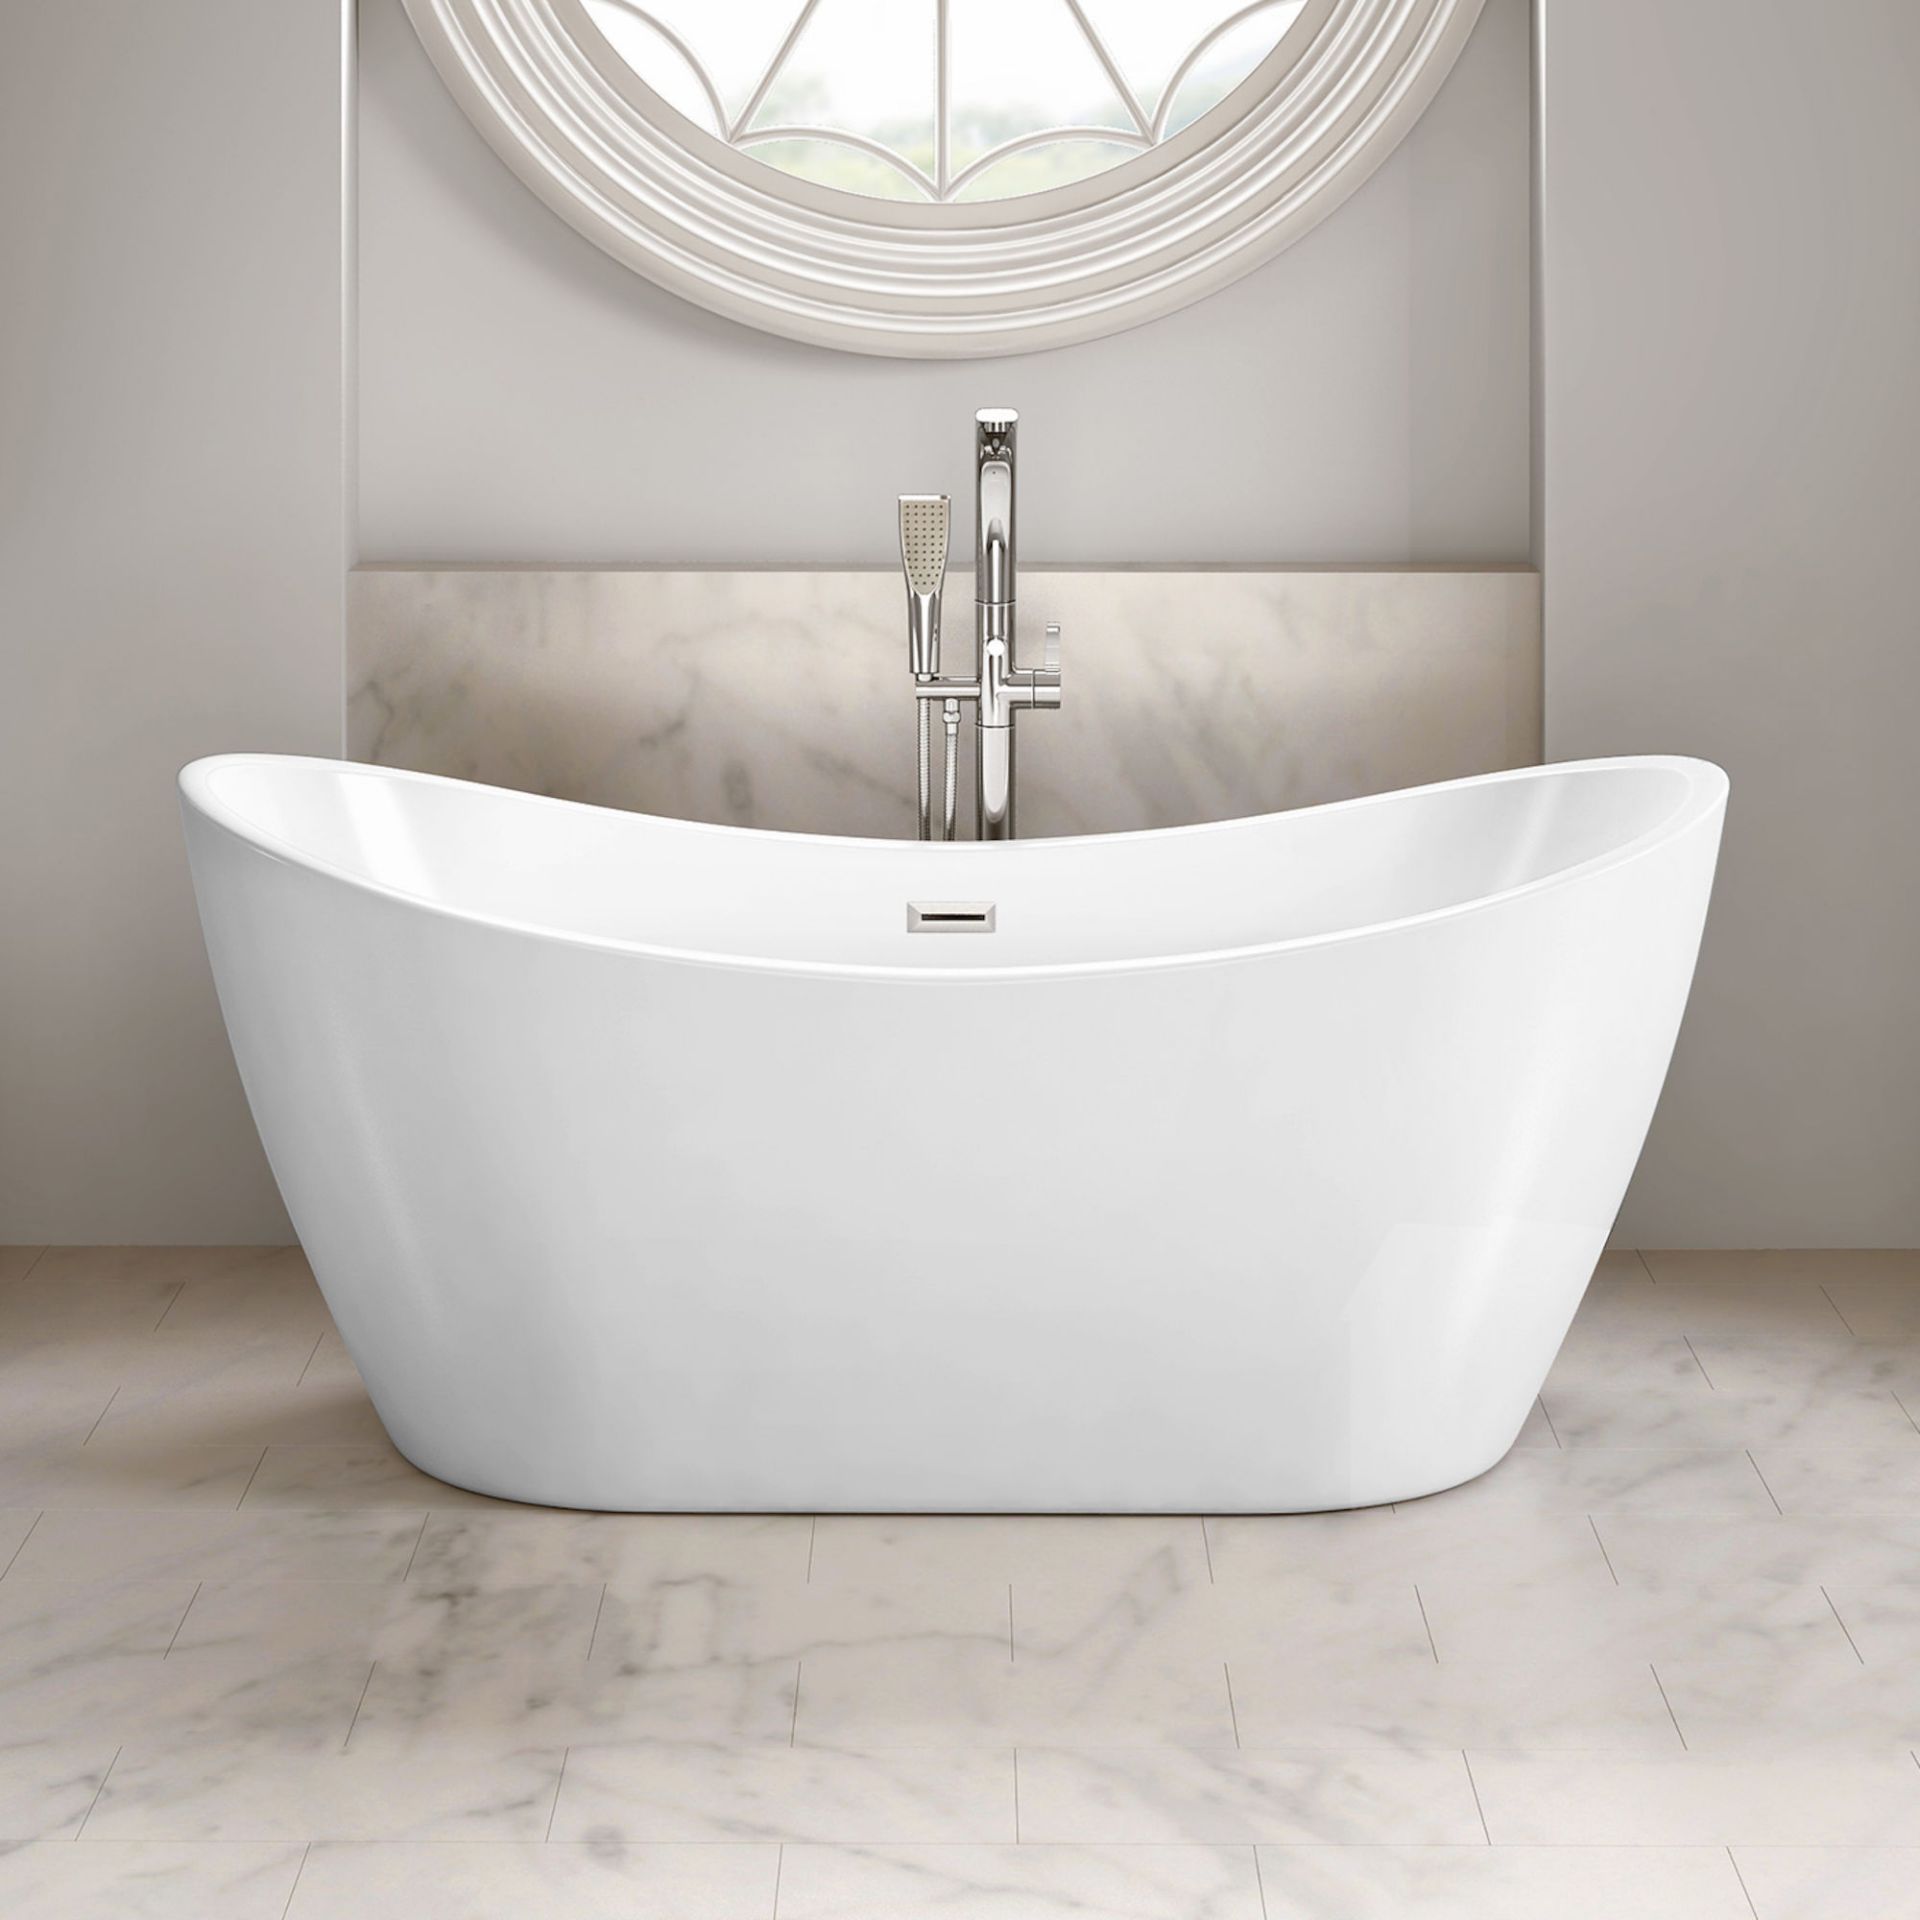 NEW (M3) 1700mmx780mm Belmont Freestanding Bath. RRP £2,999.Visually simplistic to suit any b... - Image 3 of 3